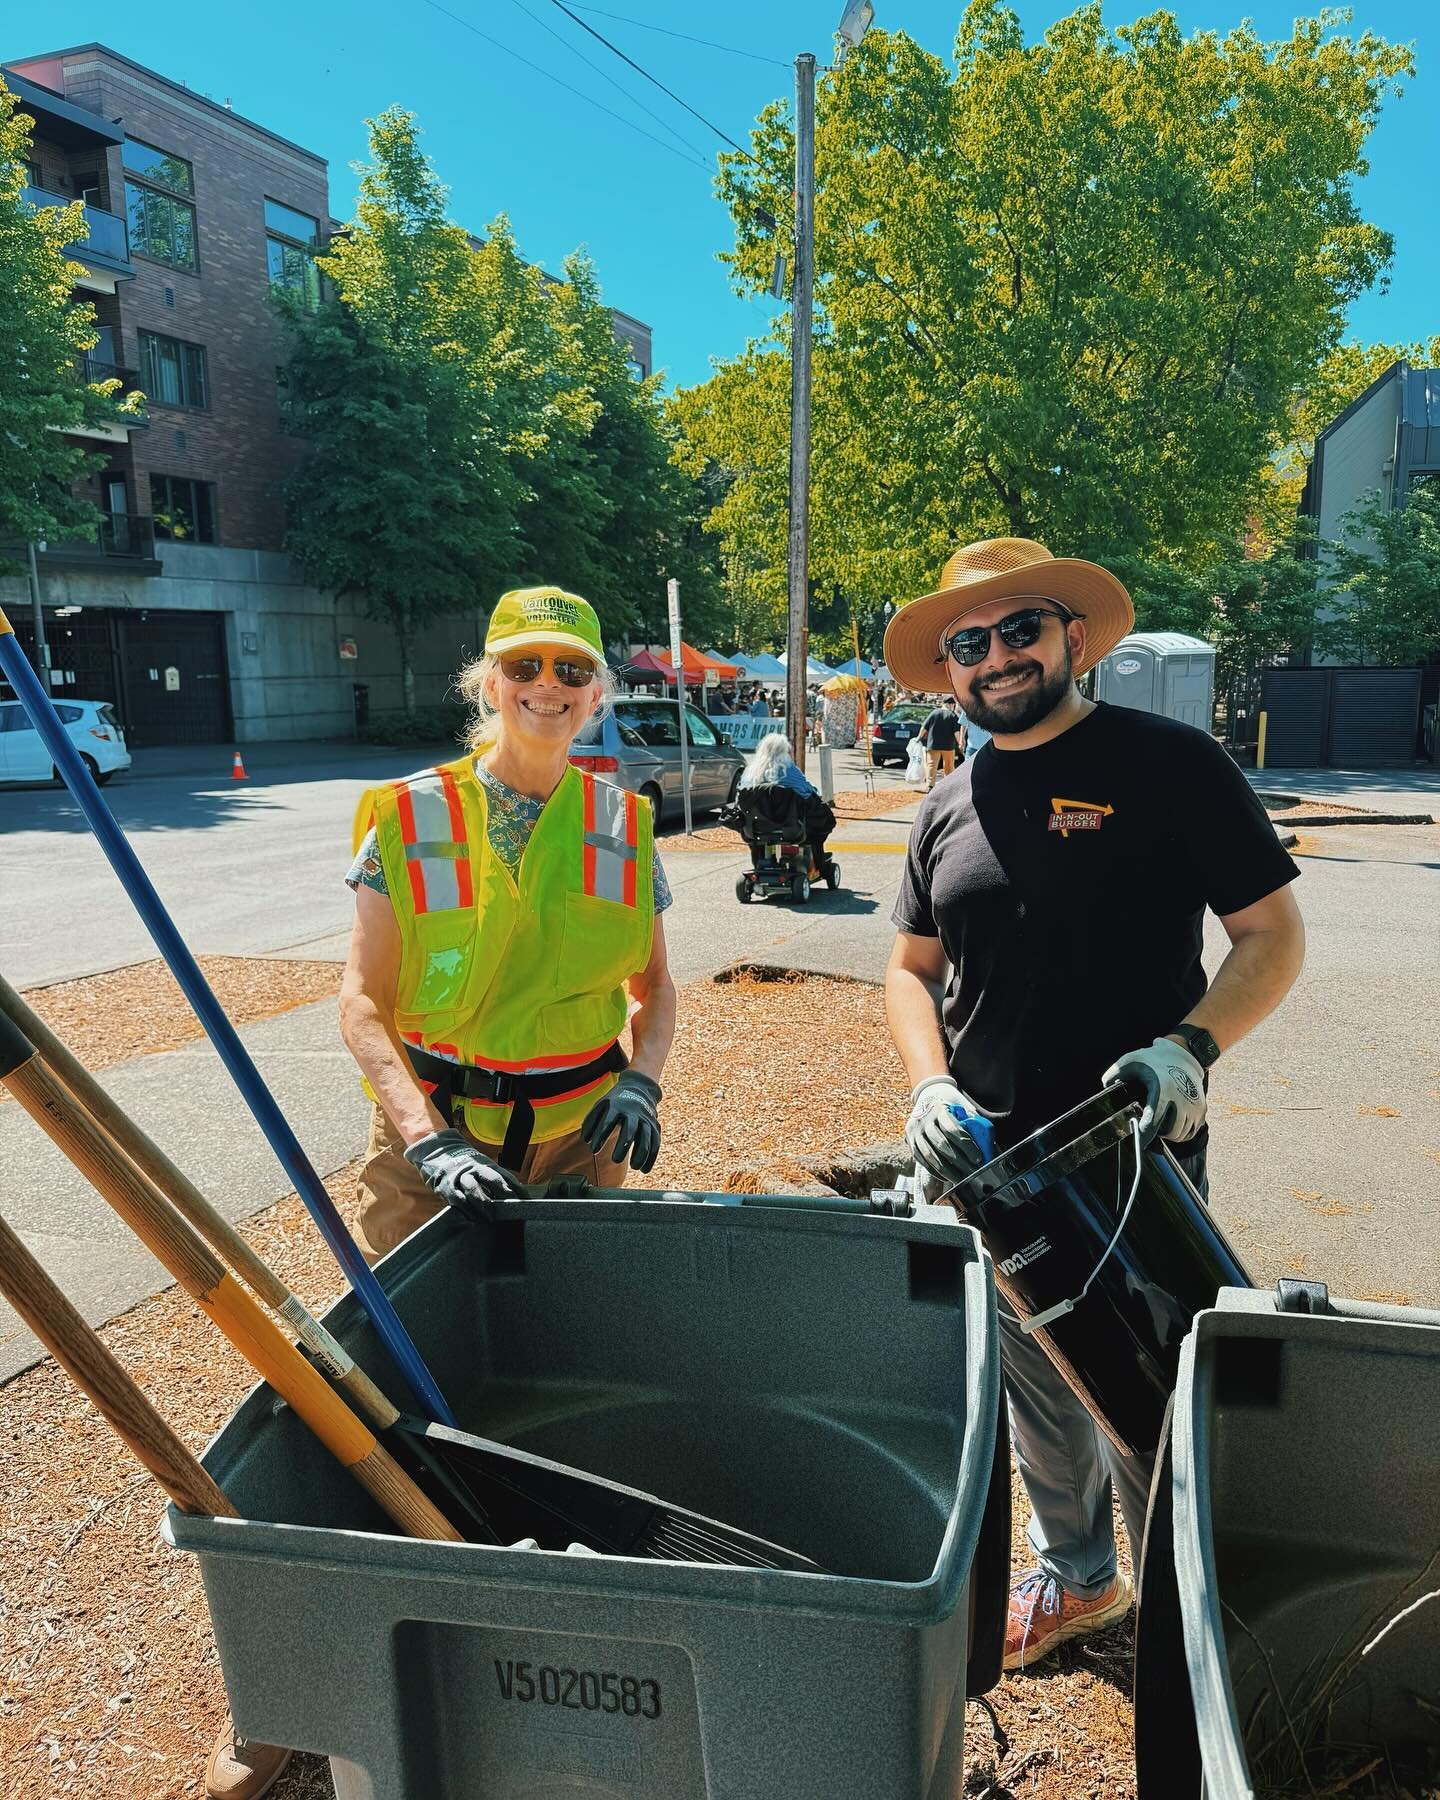 Over 100 volunteers planted 2,500+ flowers and removed 13 bins worth of trash from the downtown area at last Saturday&rsquo;s Spruce the Couve event! 🪴We were so happy to join in and support our Vancouver community!